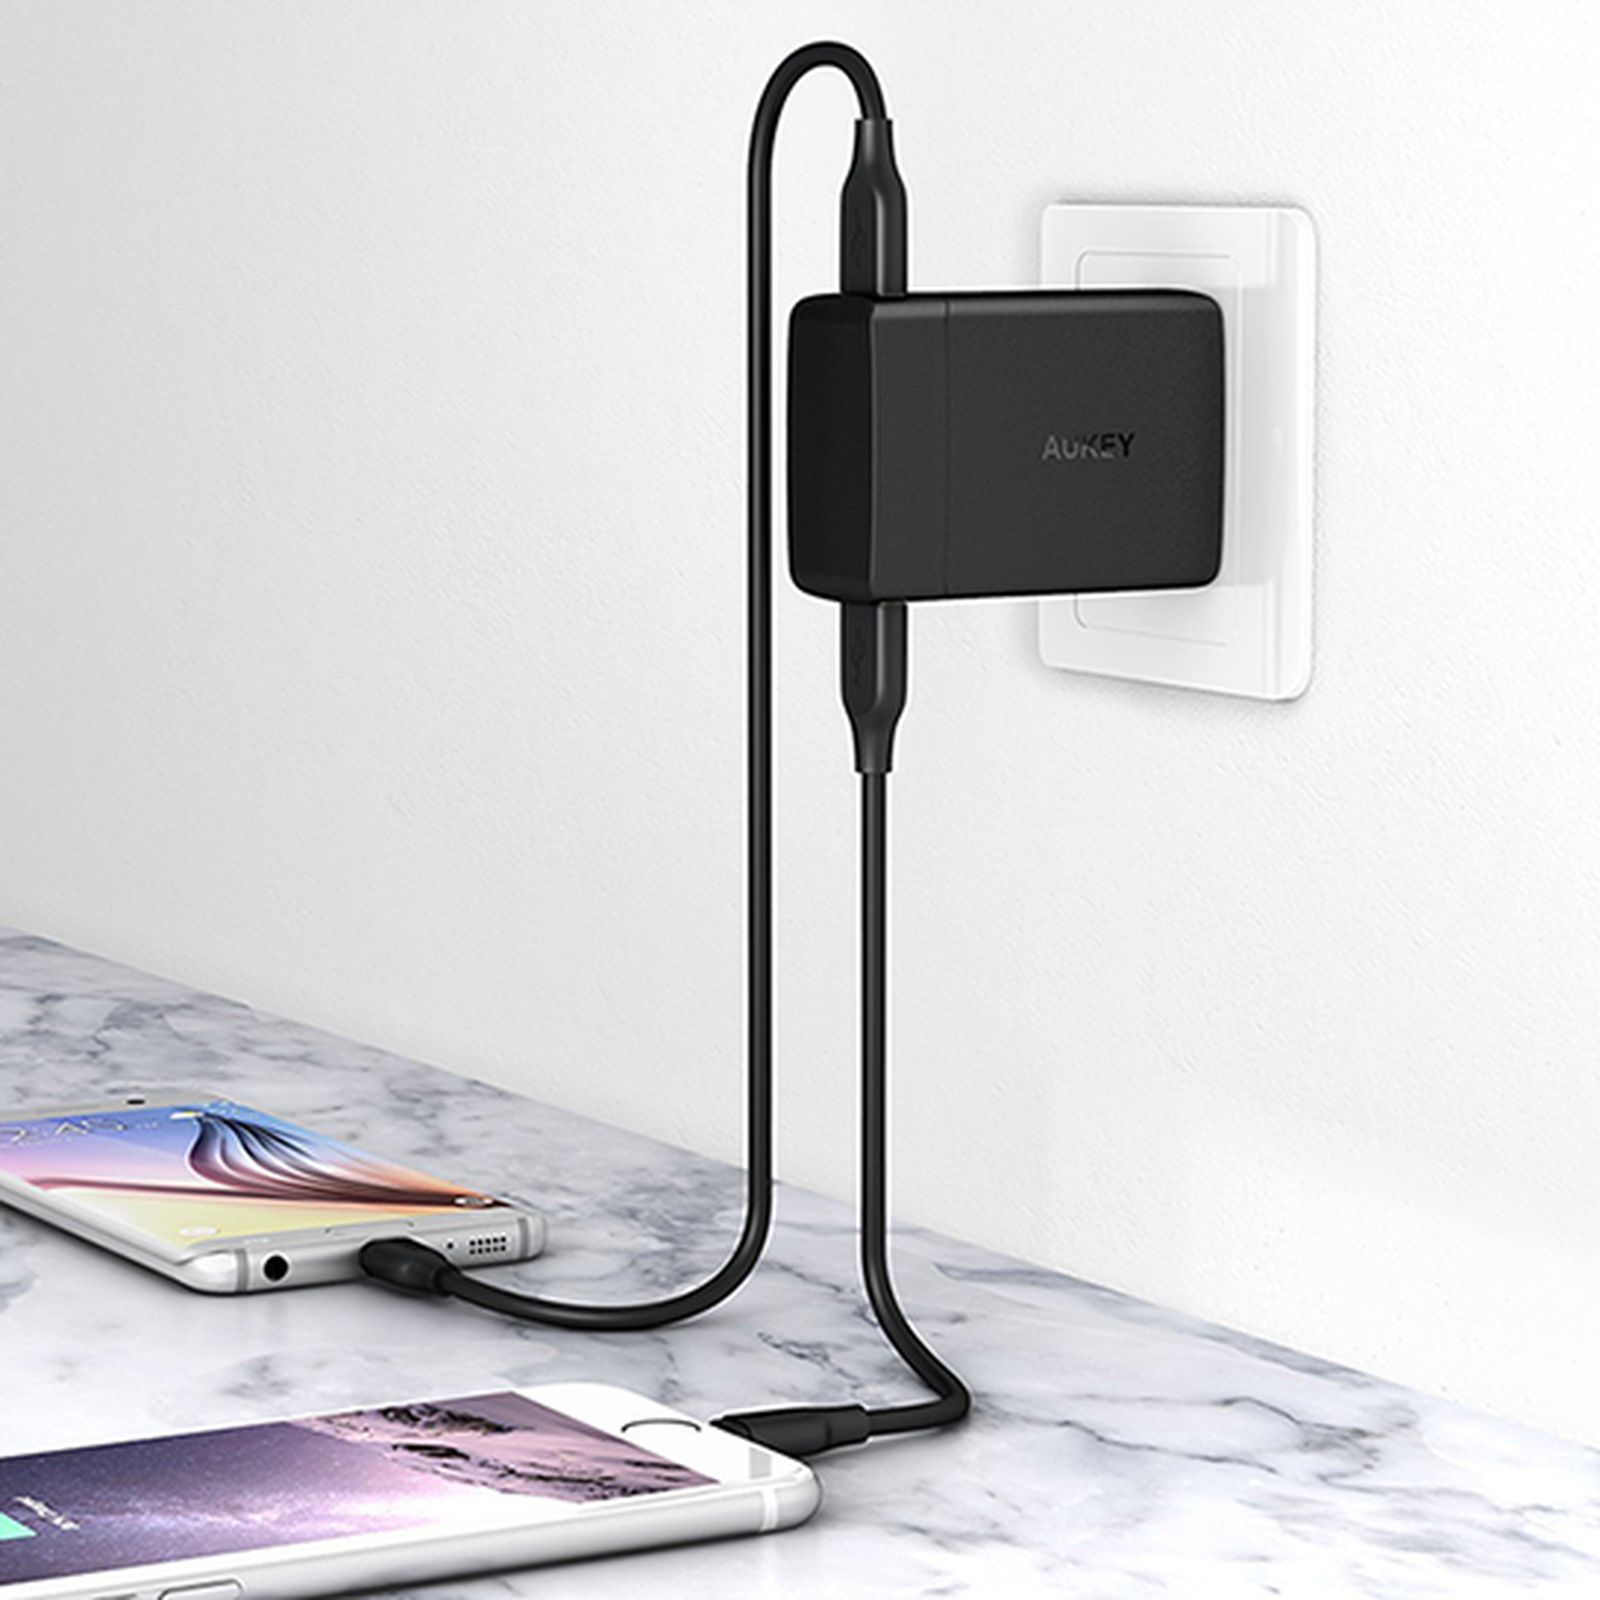 krøllet Frontier regering PSA: iPhone 8 Fast Charging Works With Third-Party USB-C Power Adapters  That Support Power Delivery - MacRumors